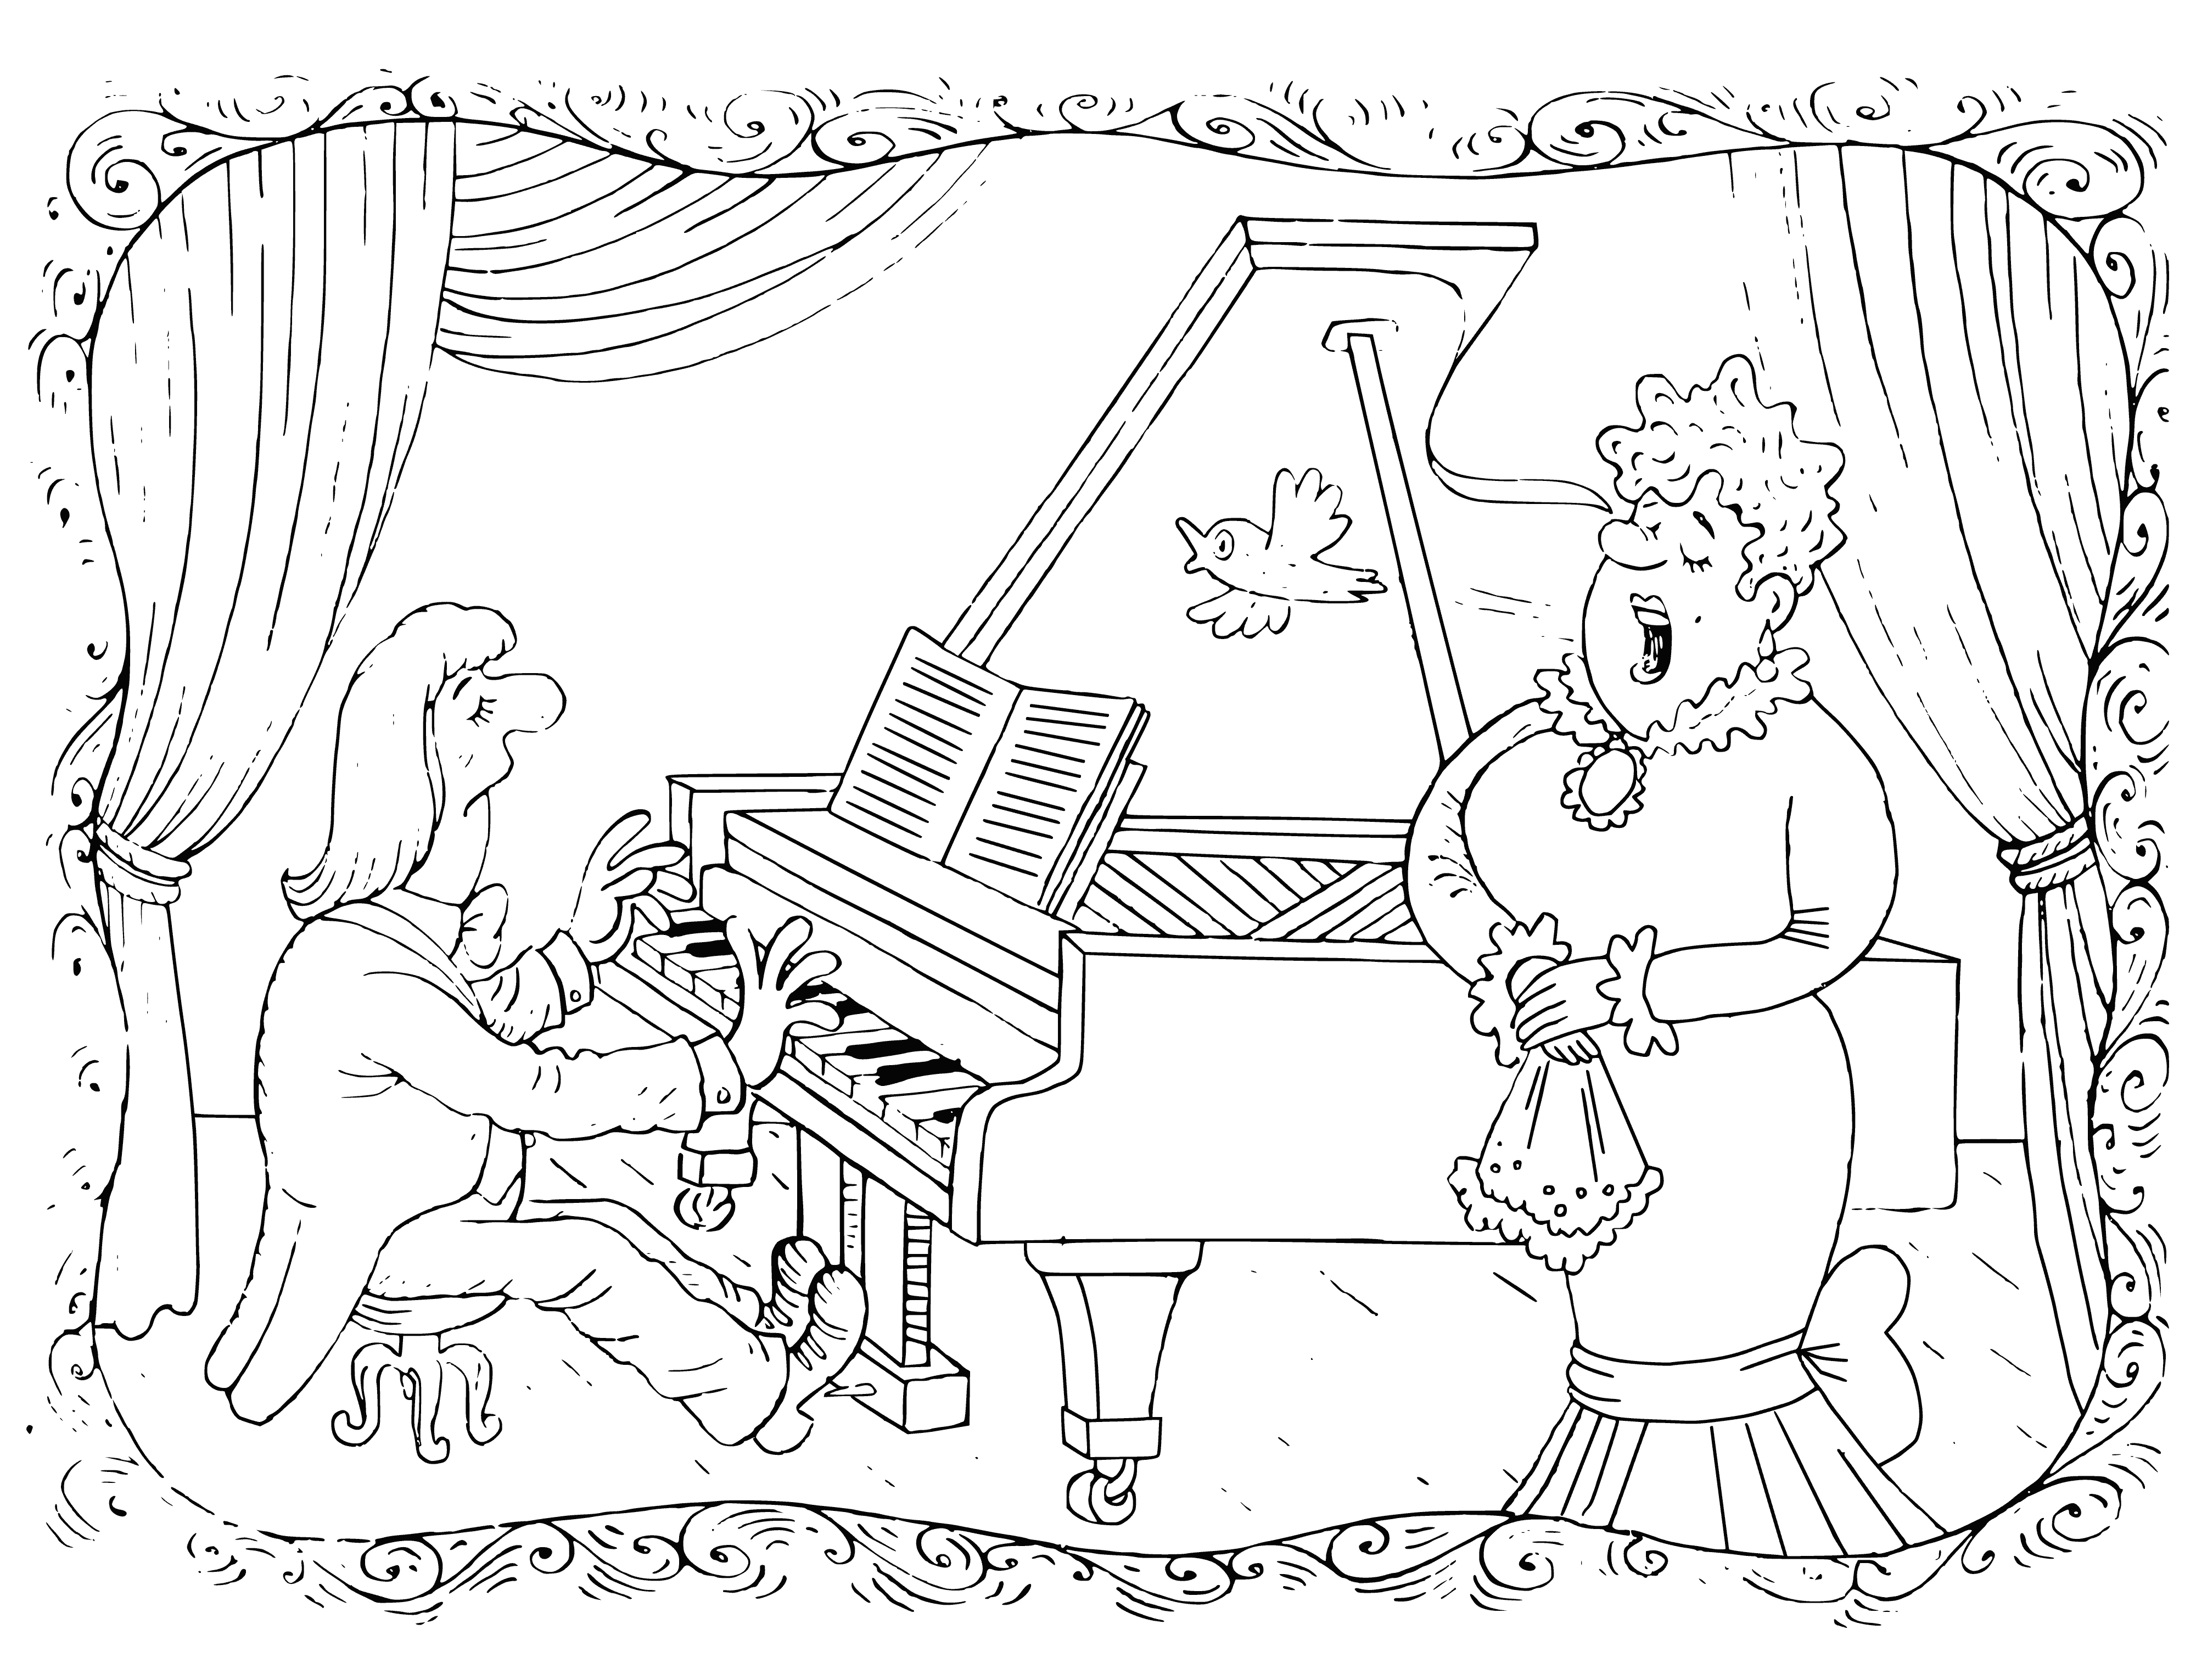 coloring page: A woman in a long dress sings opera, arms outstretched with her head tilted back.